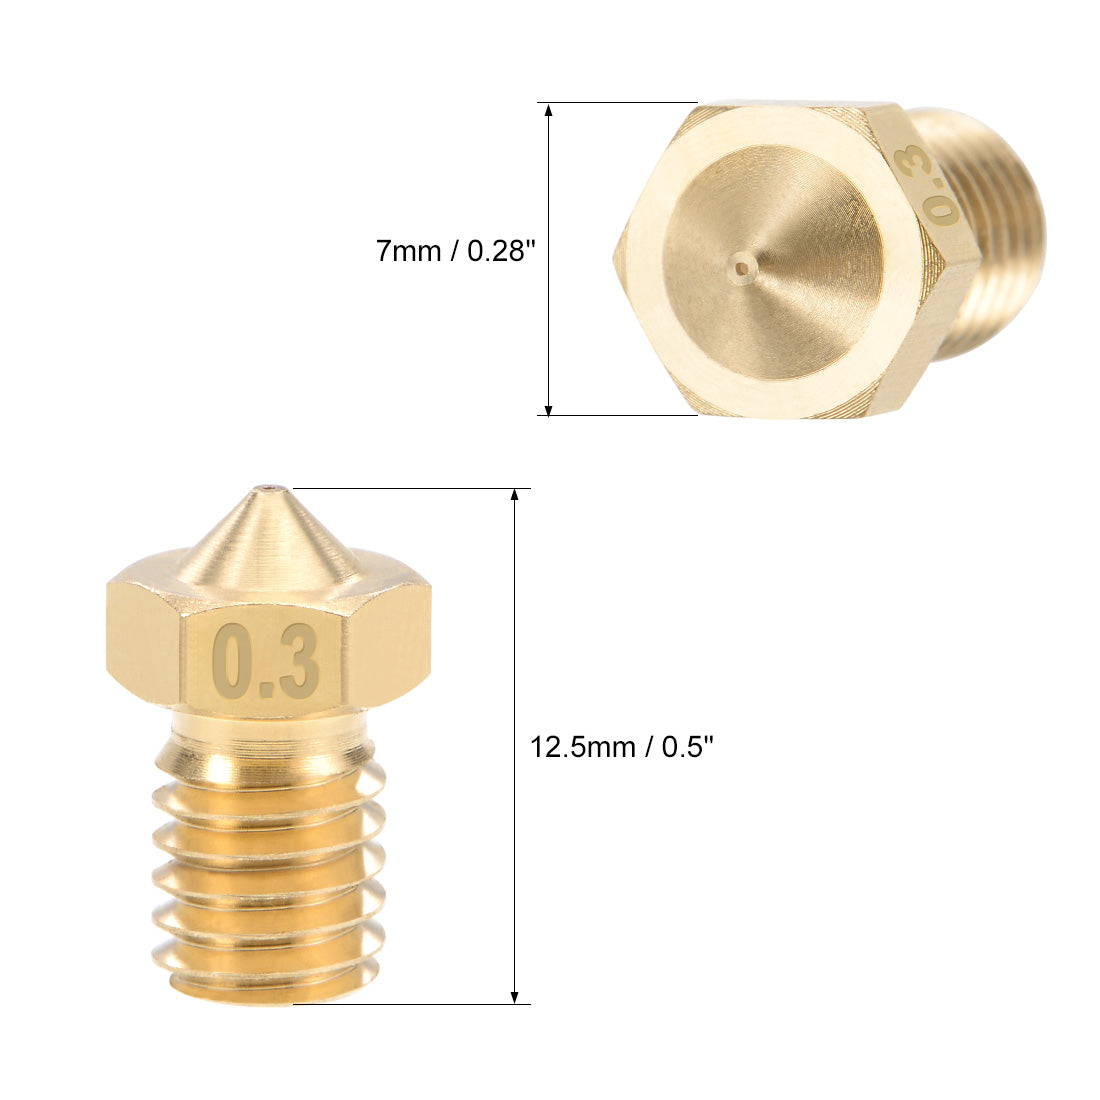 uxcell Uxcell 0.3mm 3D Printer Nozzle Head M6 for V5 V6 2mm Extruder Print, Brass 10pcs